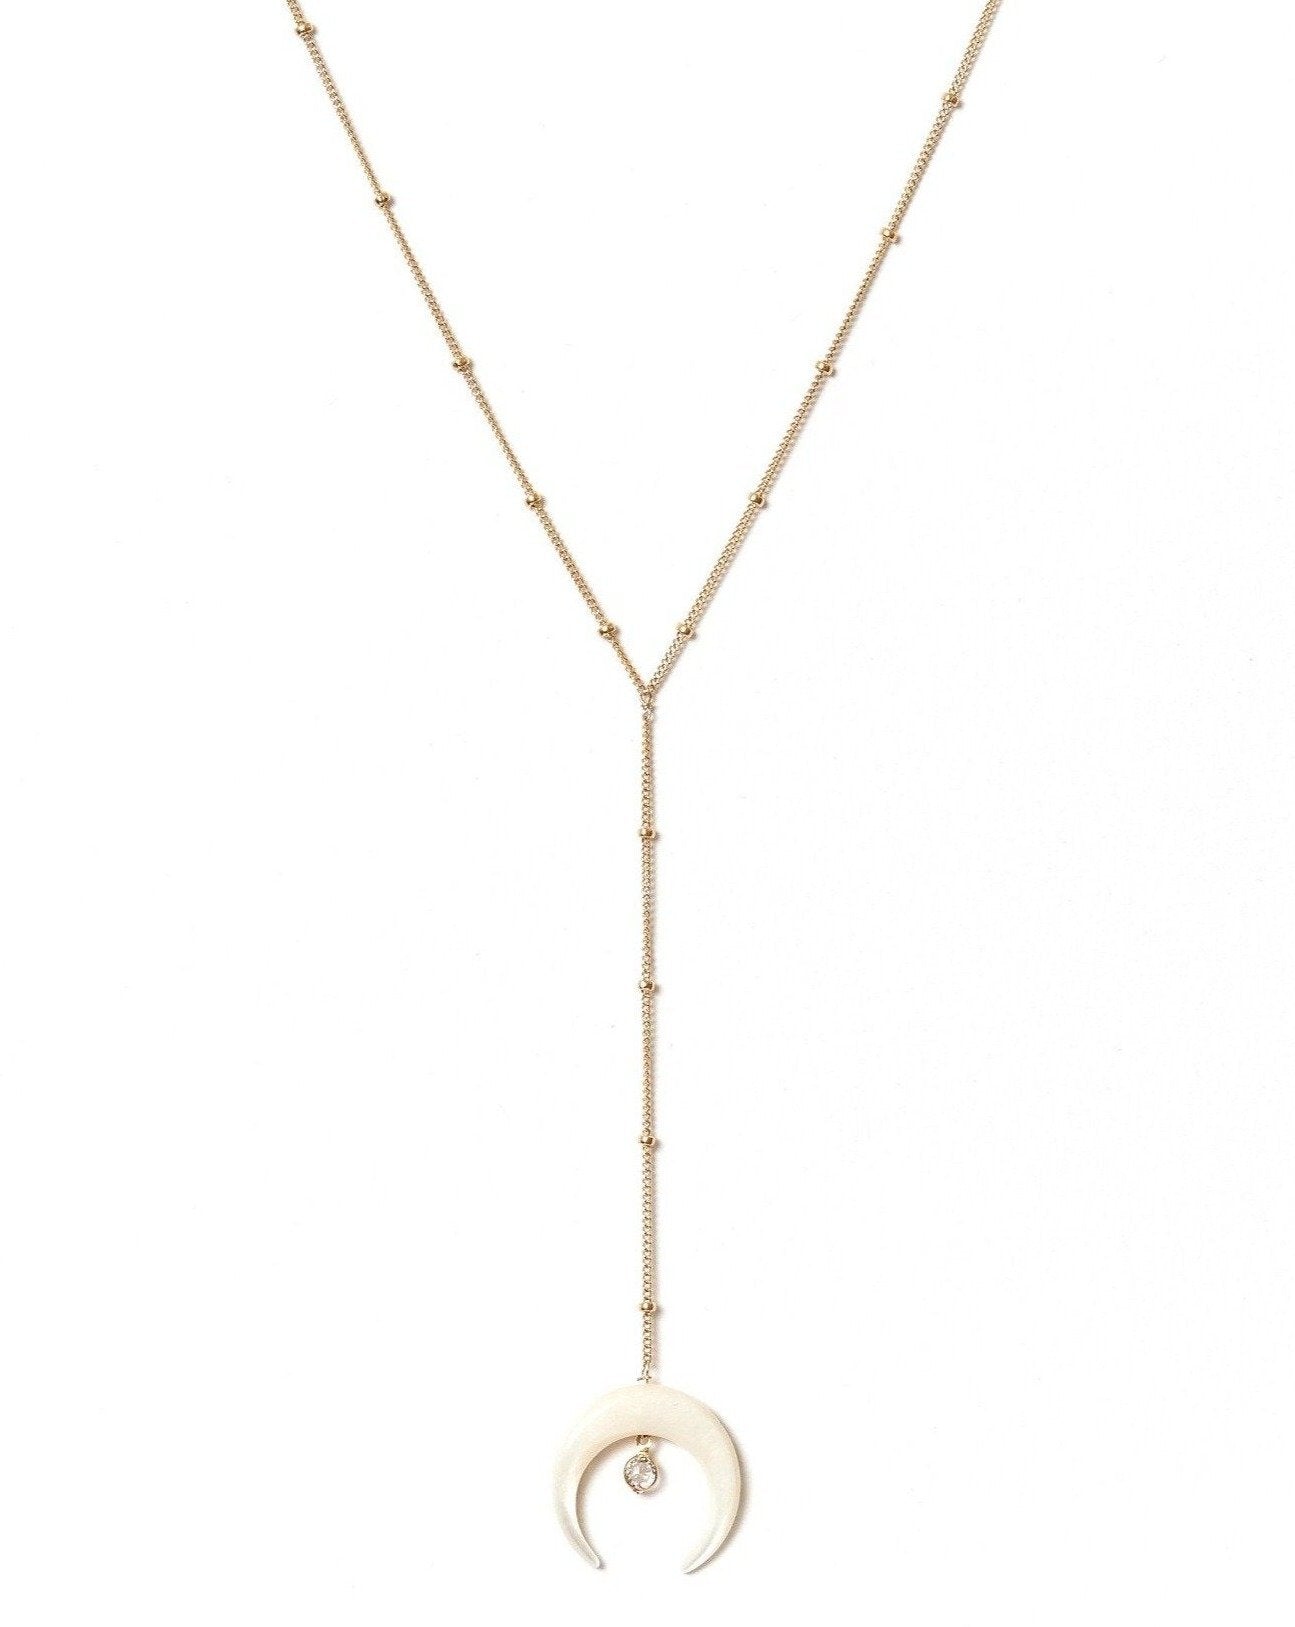 Baque Lar Necklace by KOZAKH. A 16 to 18 inch adjustable length, 3 inches chain drop lariat style necklace in 14K Gold Filled, featuring a hand-carved Mother of Pearl moon charm and a 2mm Swarovski Crystal.